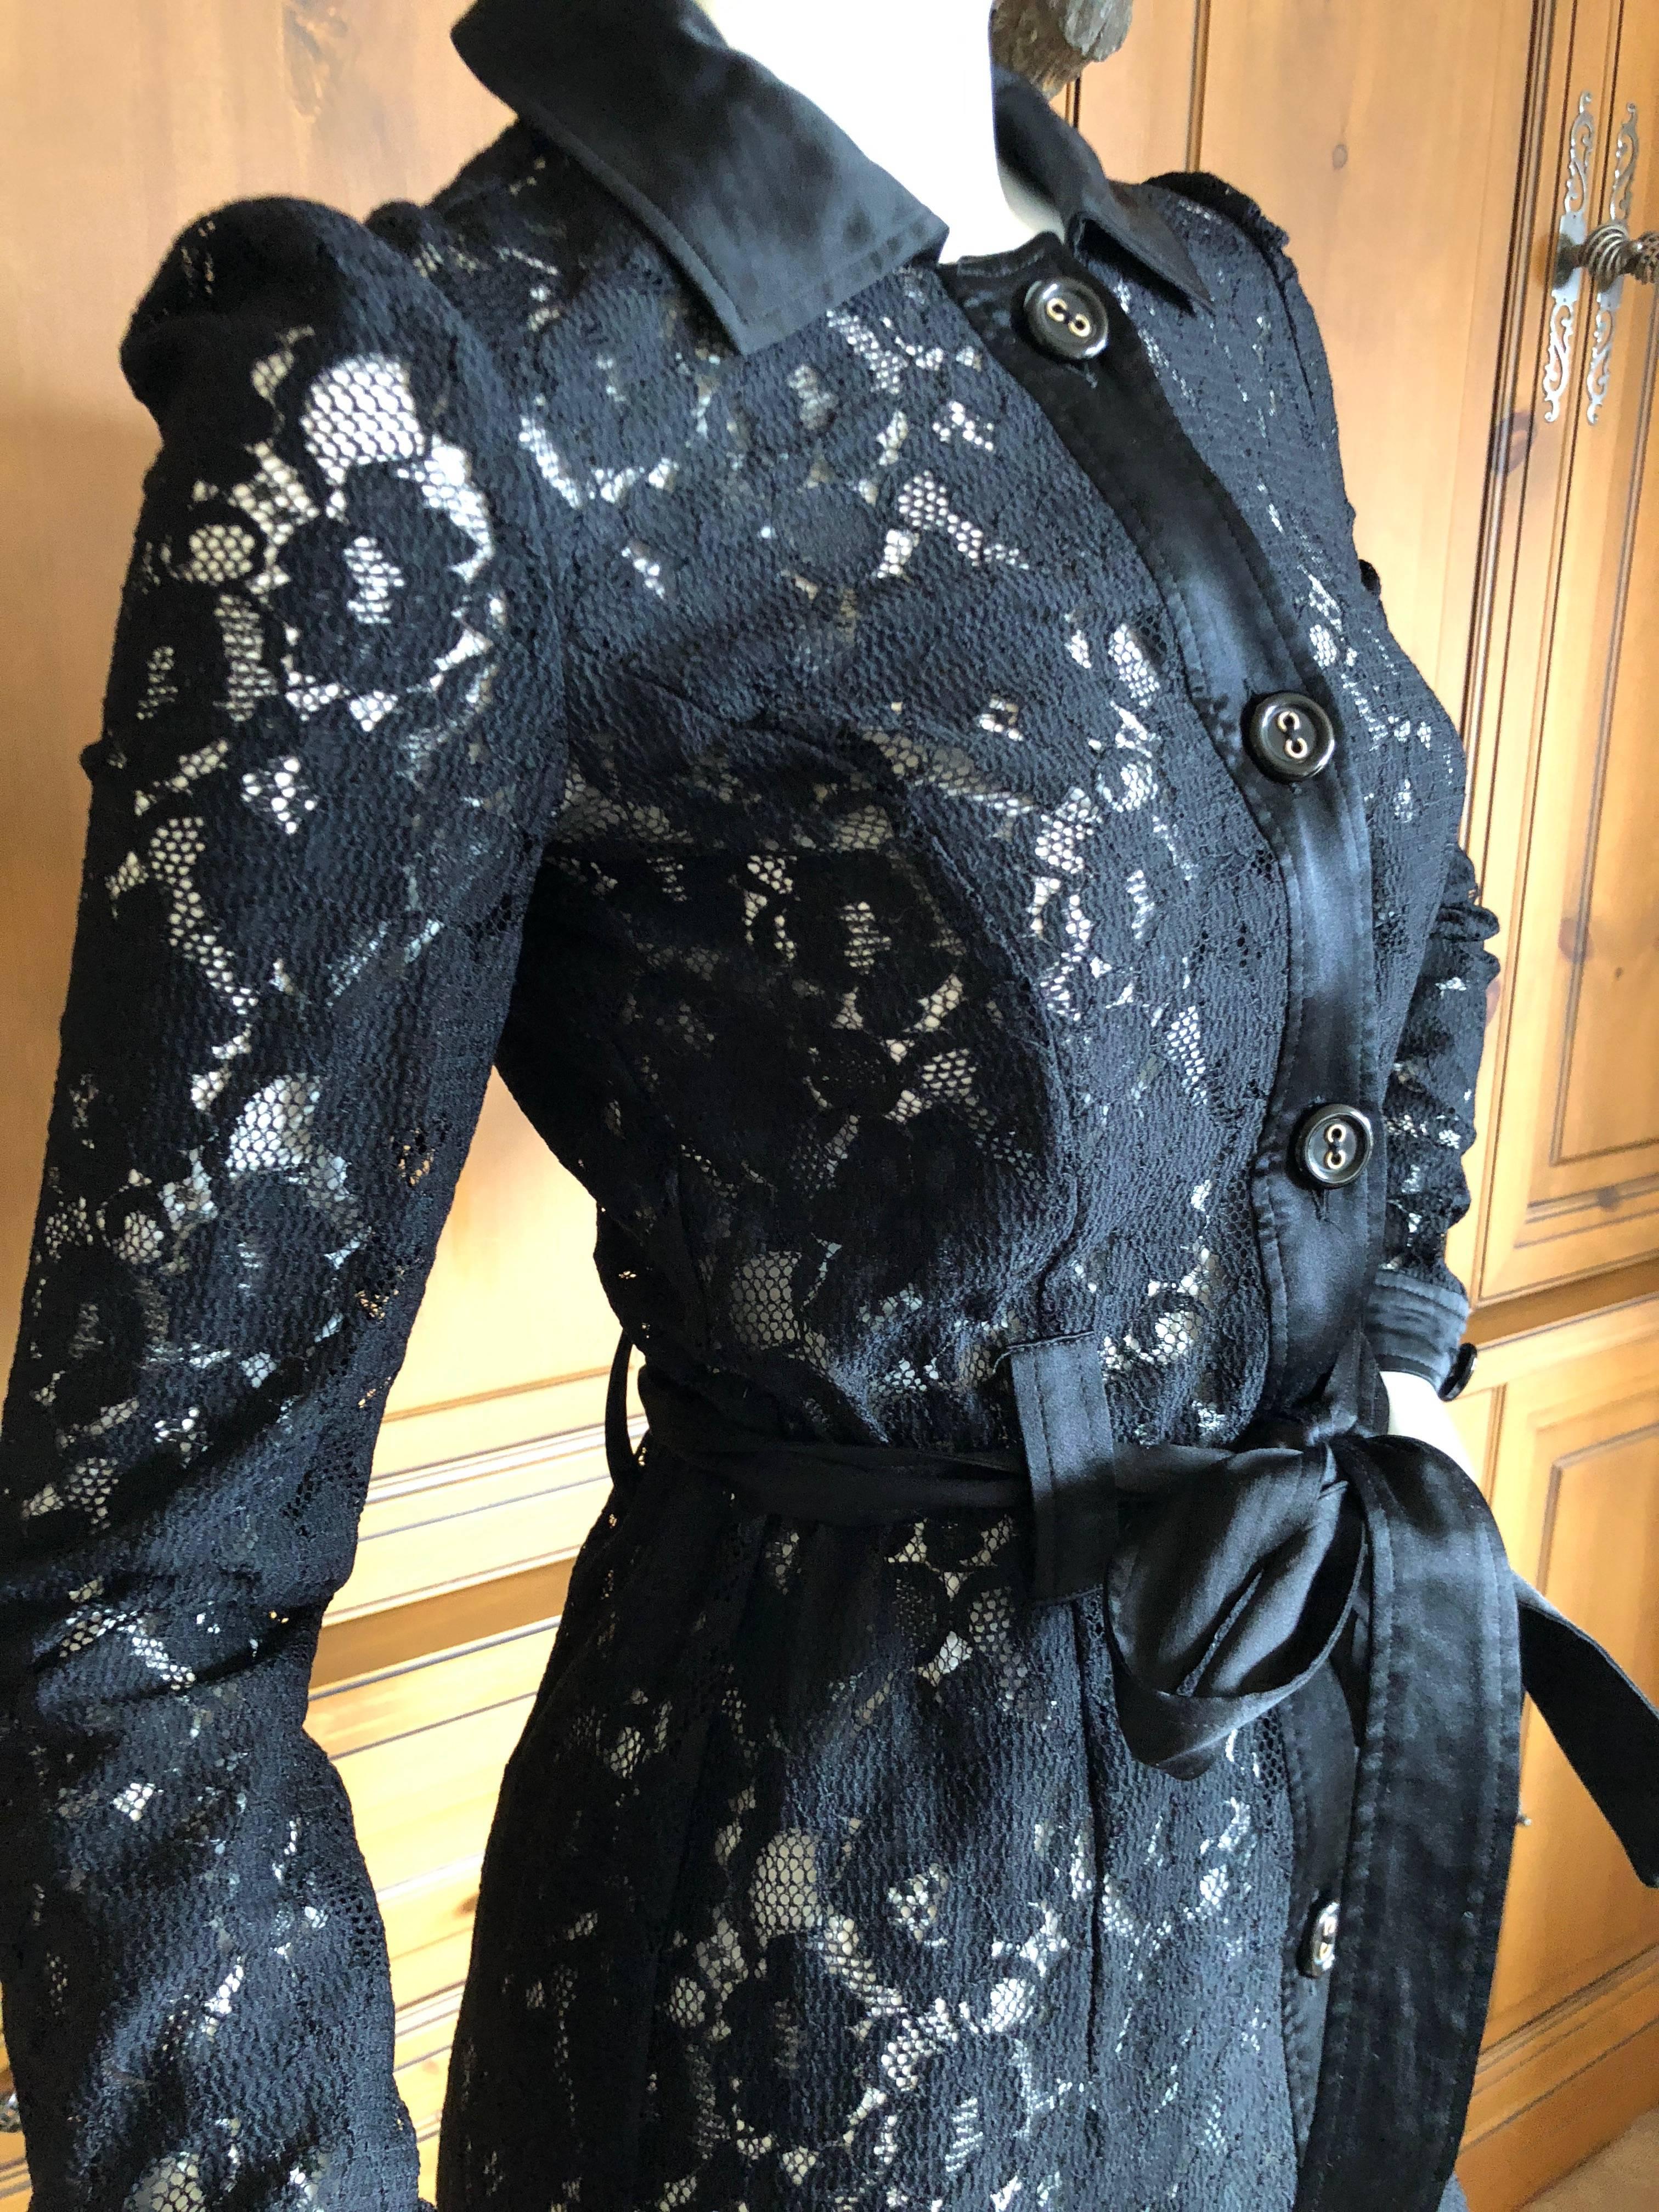 Dolce & Gabbana D&G Vintage Sheer Lace Dress  In Excellent Condition For Sale In Cloverdale, CA